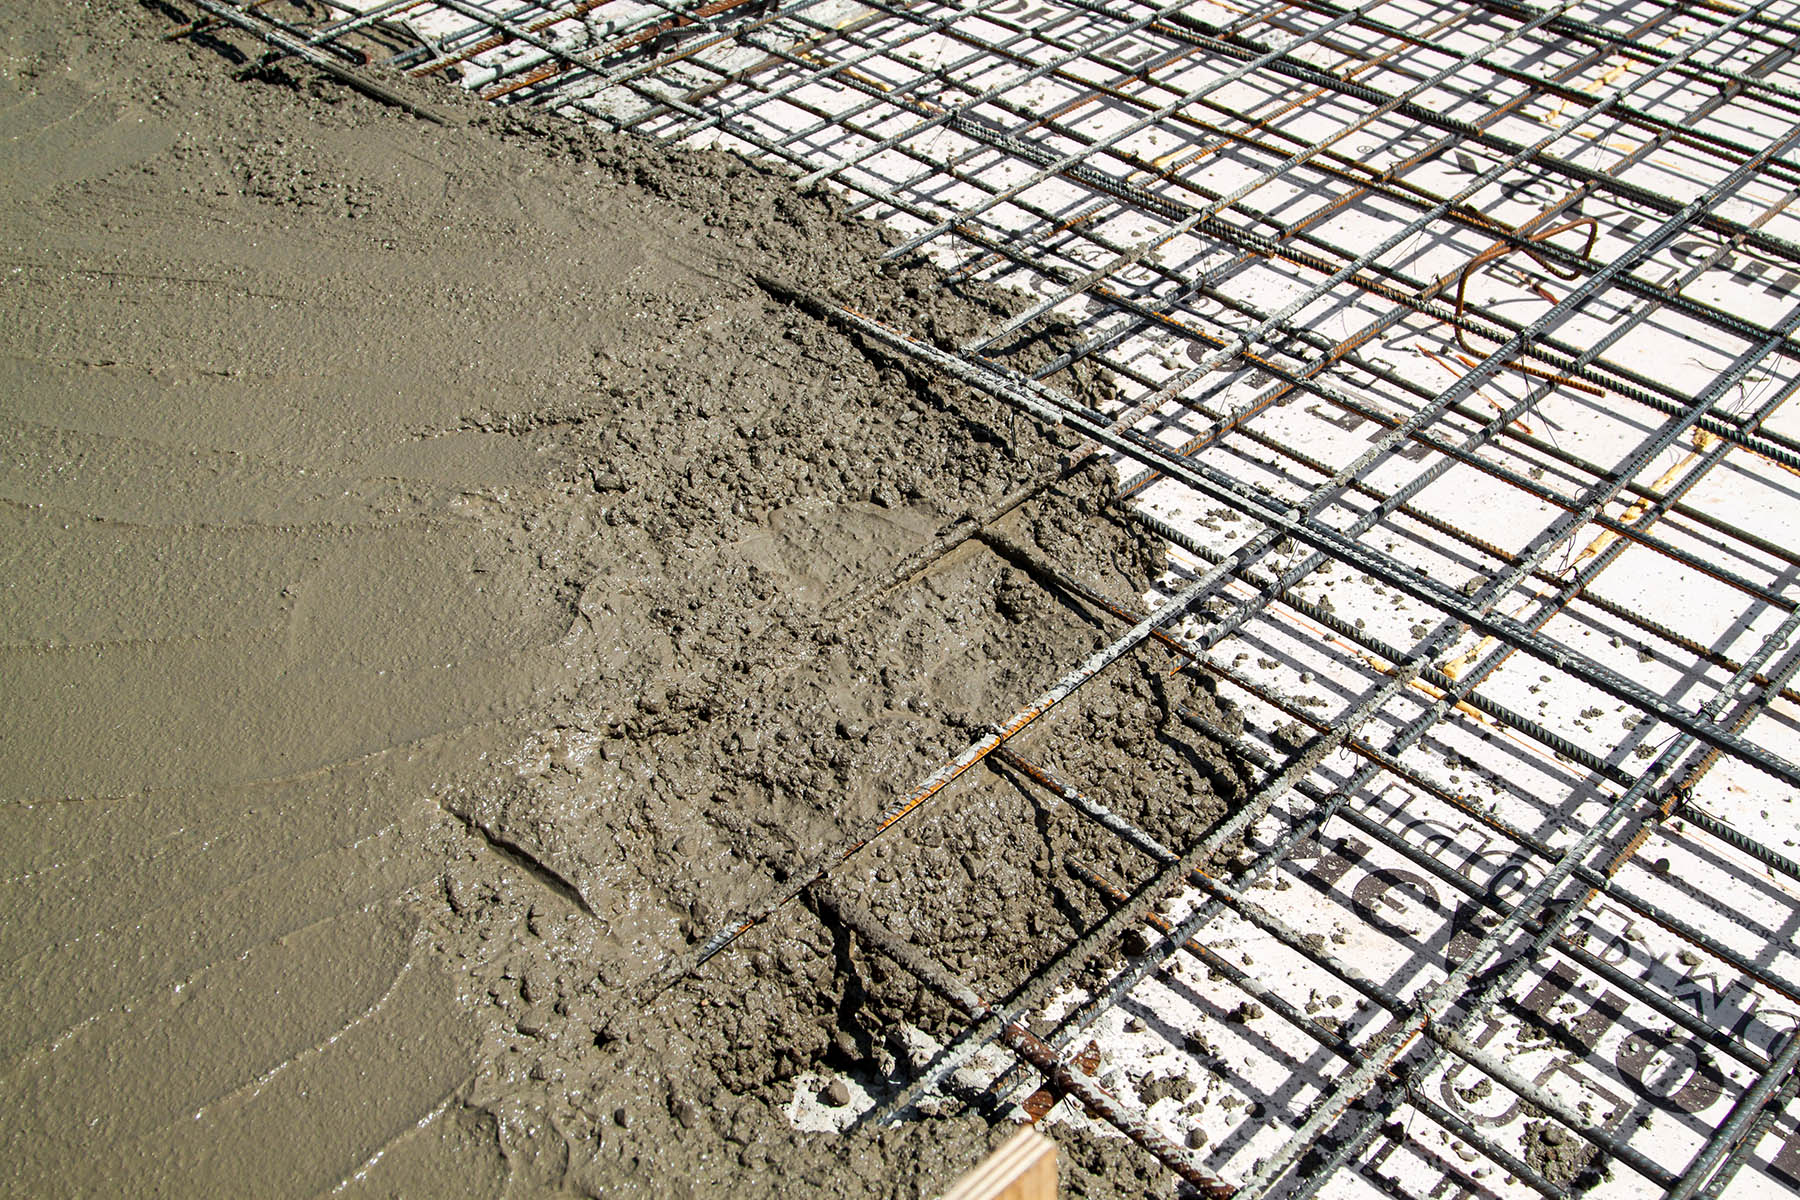 614 Concrete - Reinforced Concrete: Understanding its Strength and Versatility